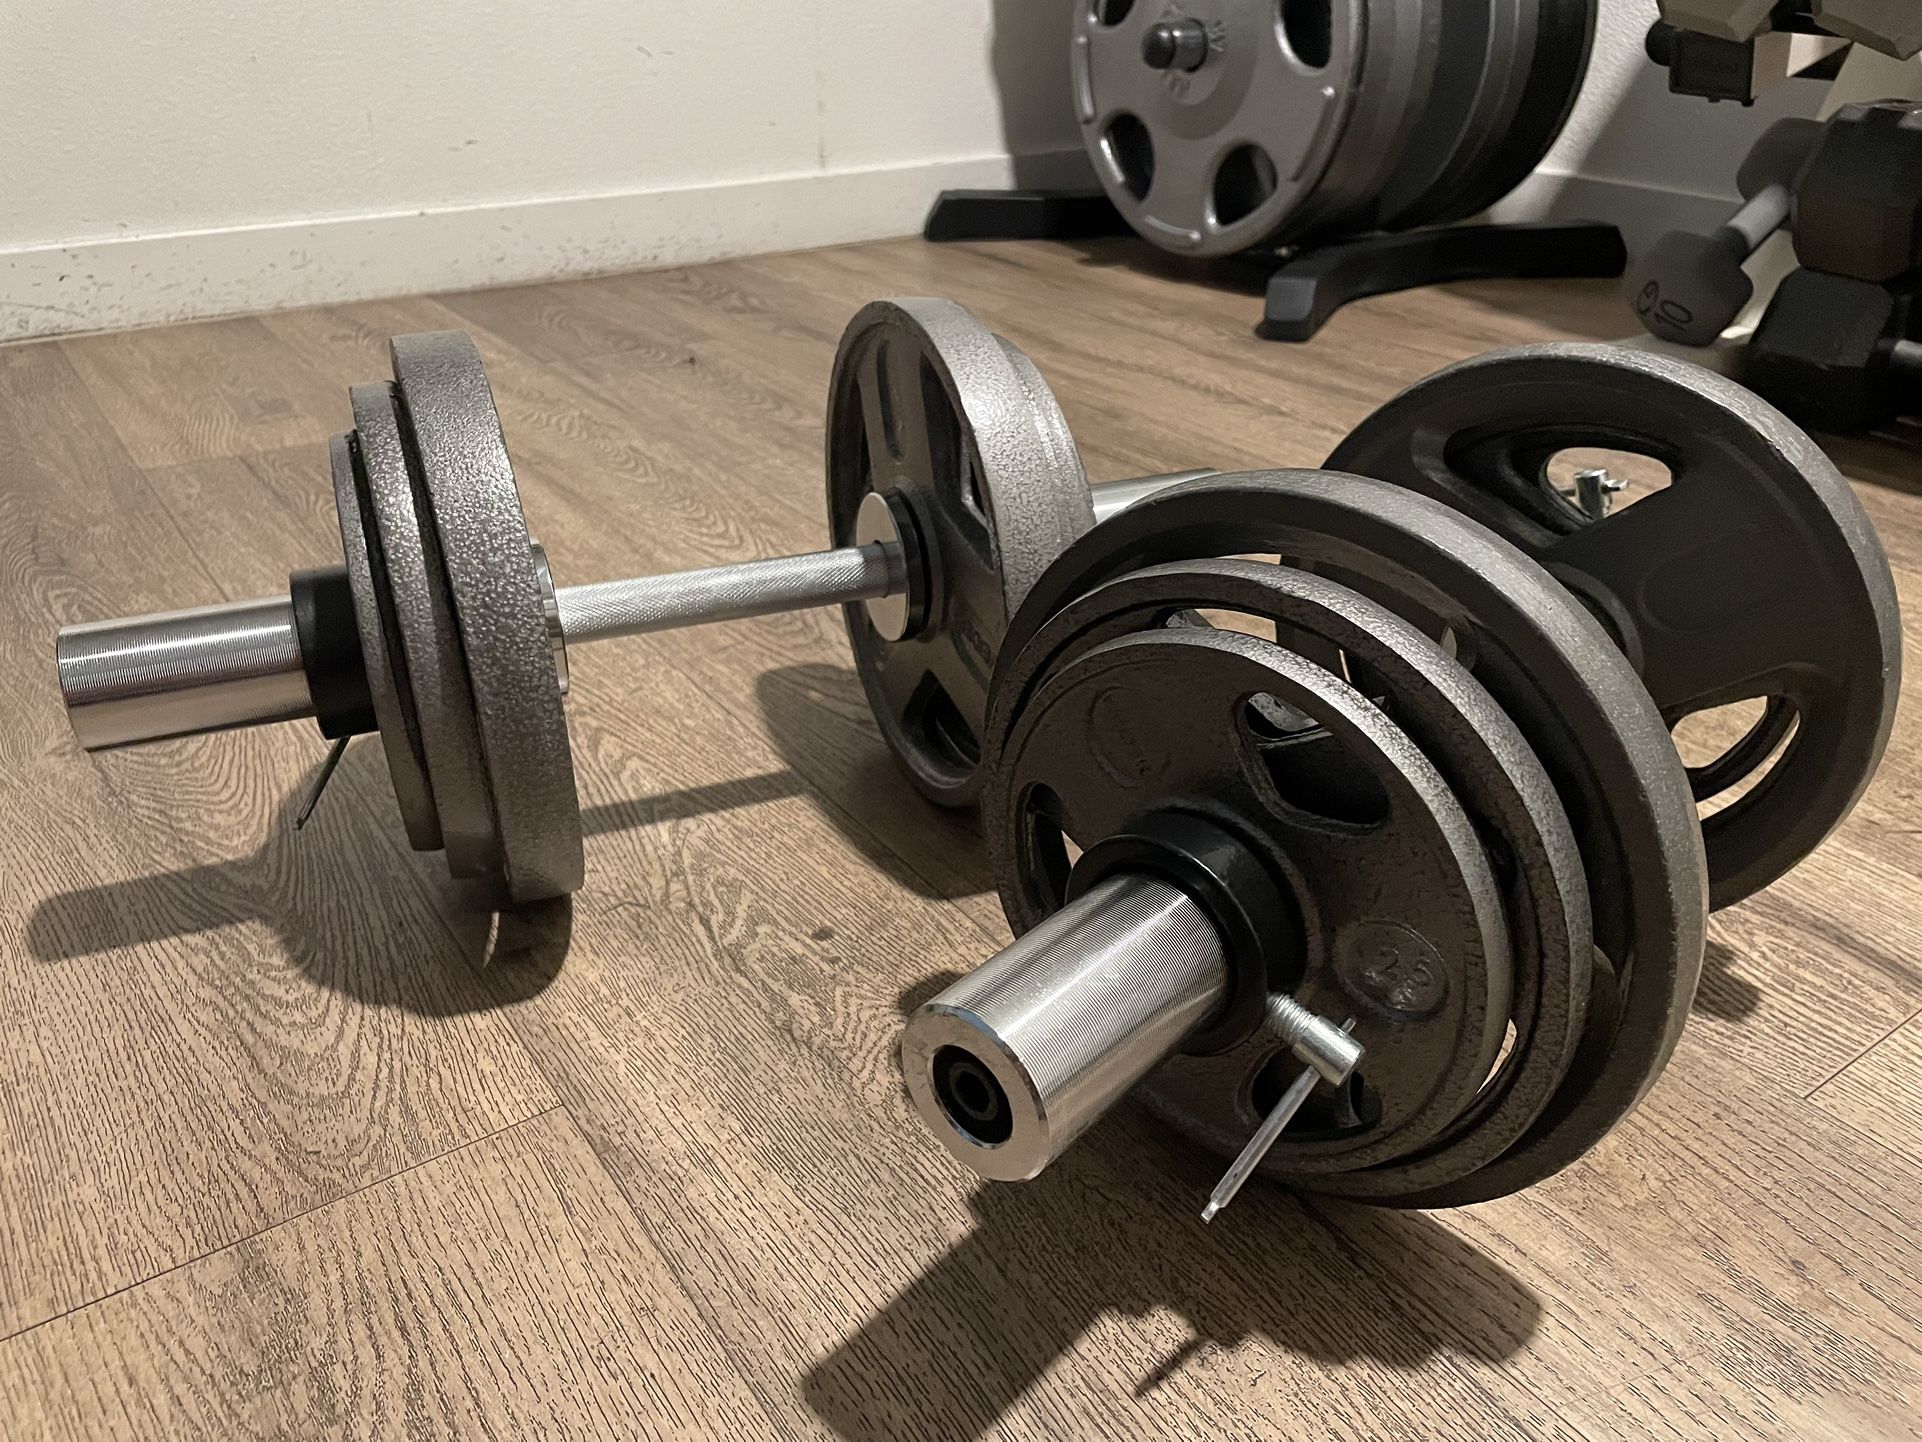 Beautiful Olympic Dumbbells [only Set I Have] 45 lbs On Each Hand (90 lbs Total)